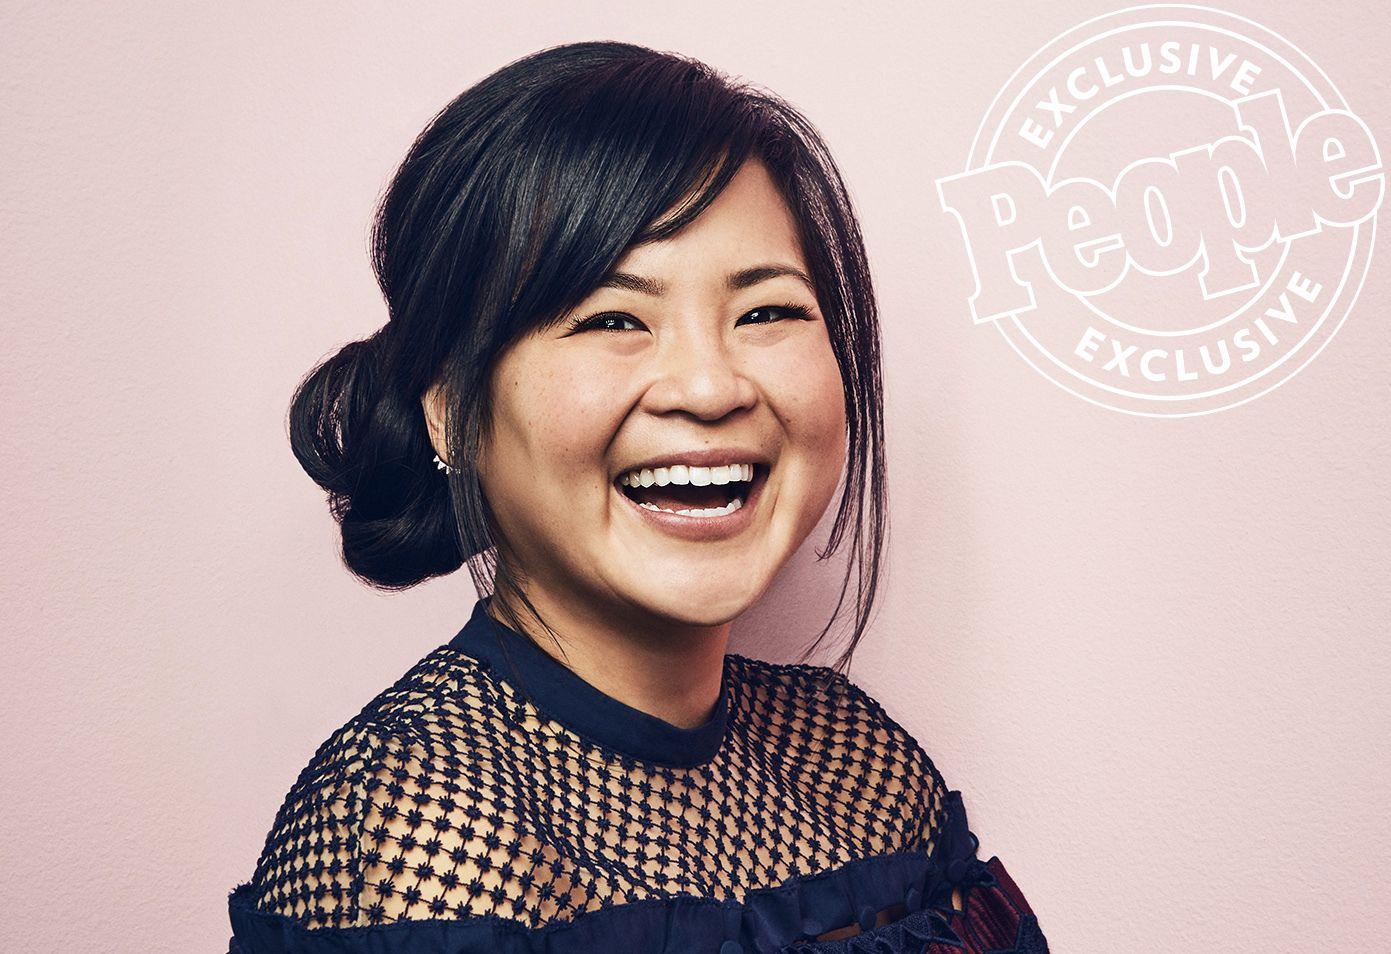 Star Wars: The Last Jedi's Kelly Marie Tran Opens Up About Her